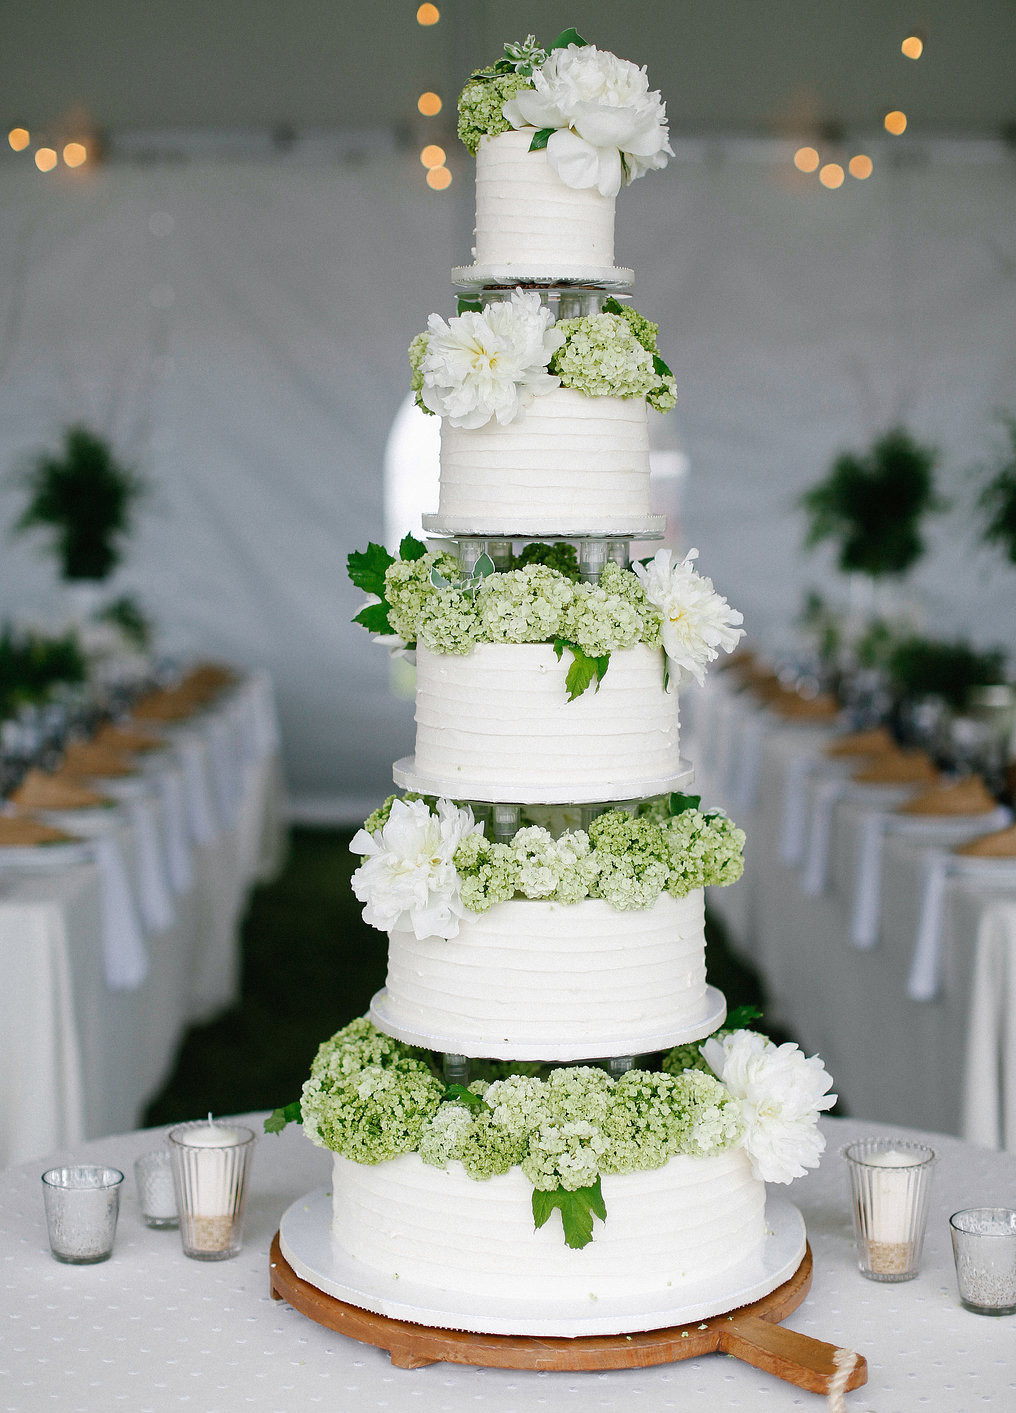 How To Decorate Wedding Cakes
 Wedding Cakes 20 Ways to Decorate with Fresh Flowers